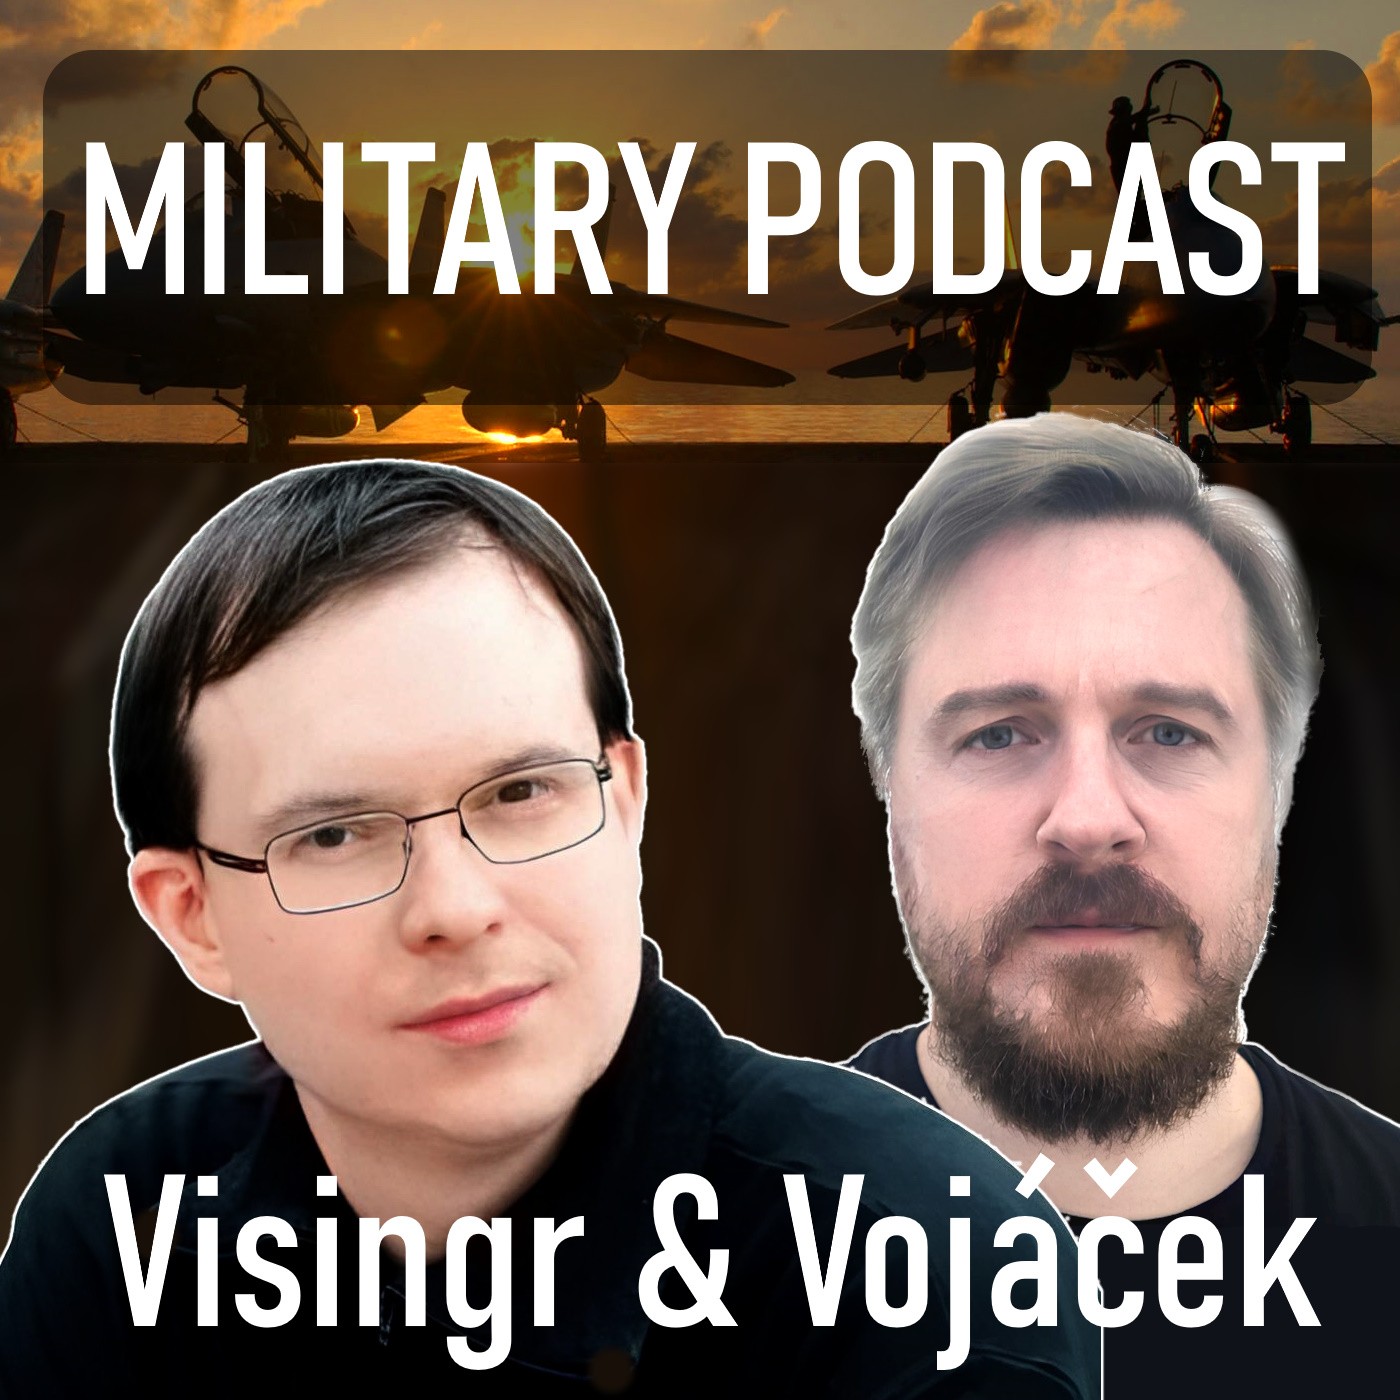 Military podcast